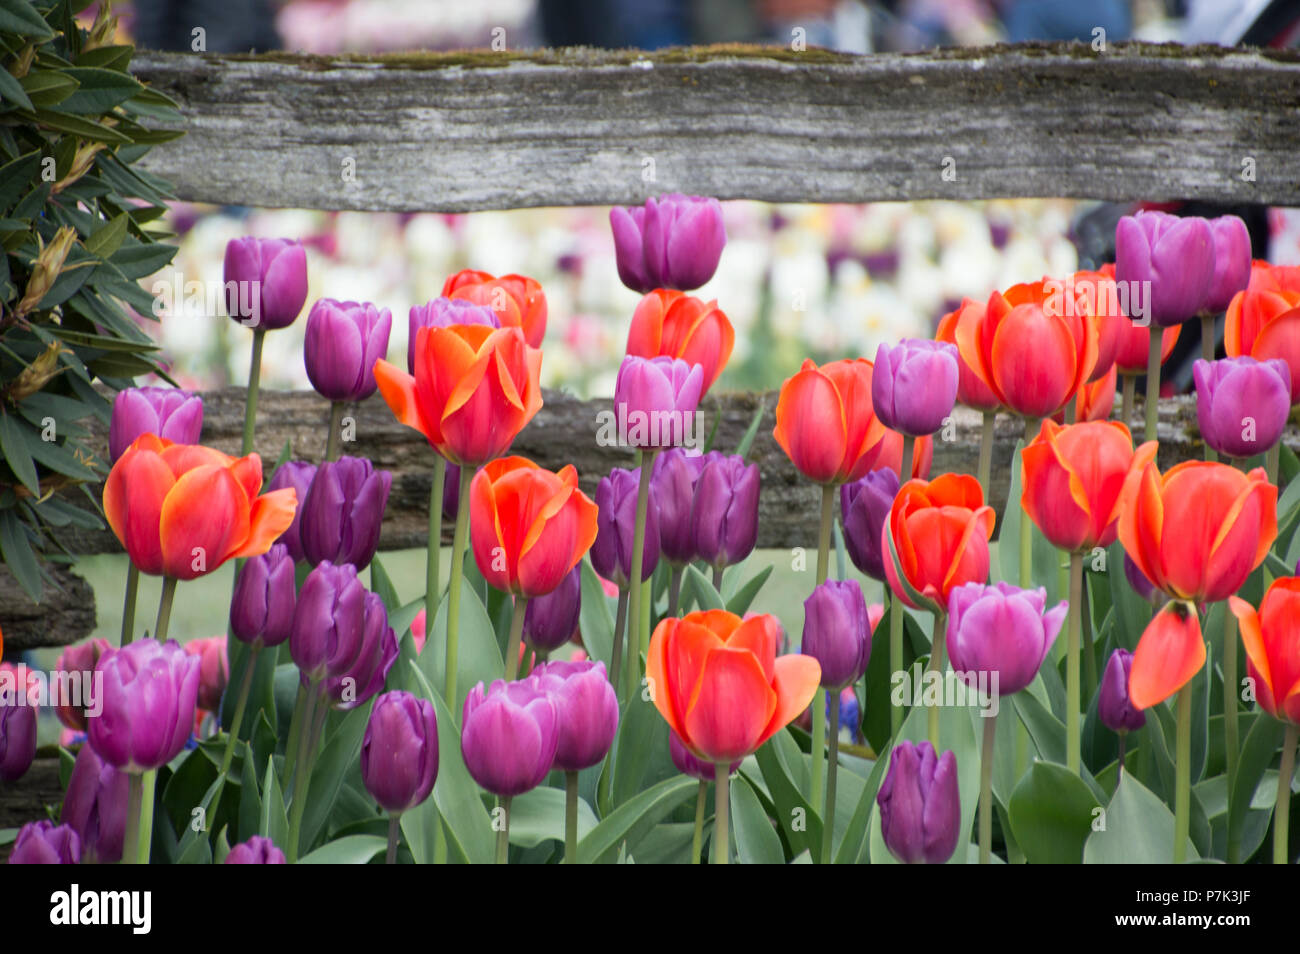 Tulips on display in the Skagit Valley of western Washington State at Roozengaardes Display and Bulb farm. Stock Photo